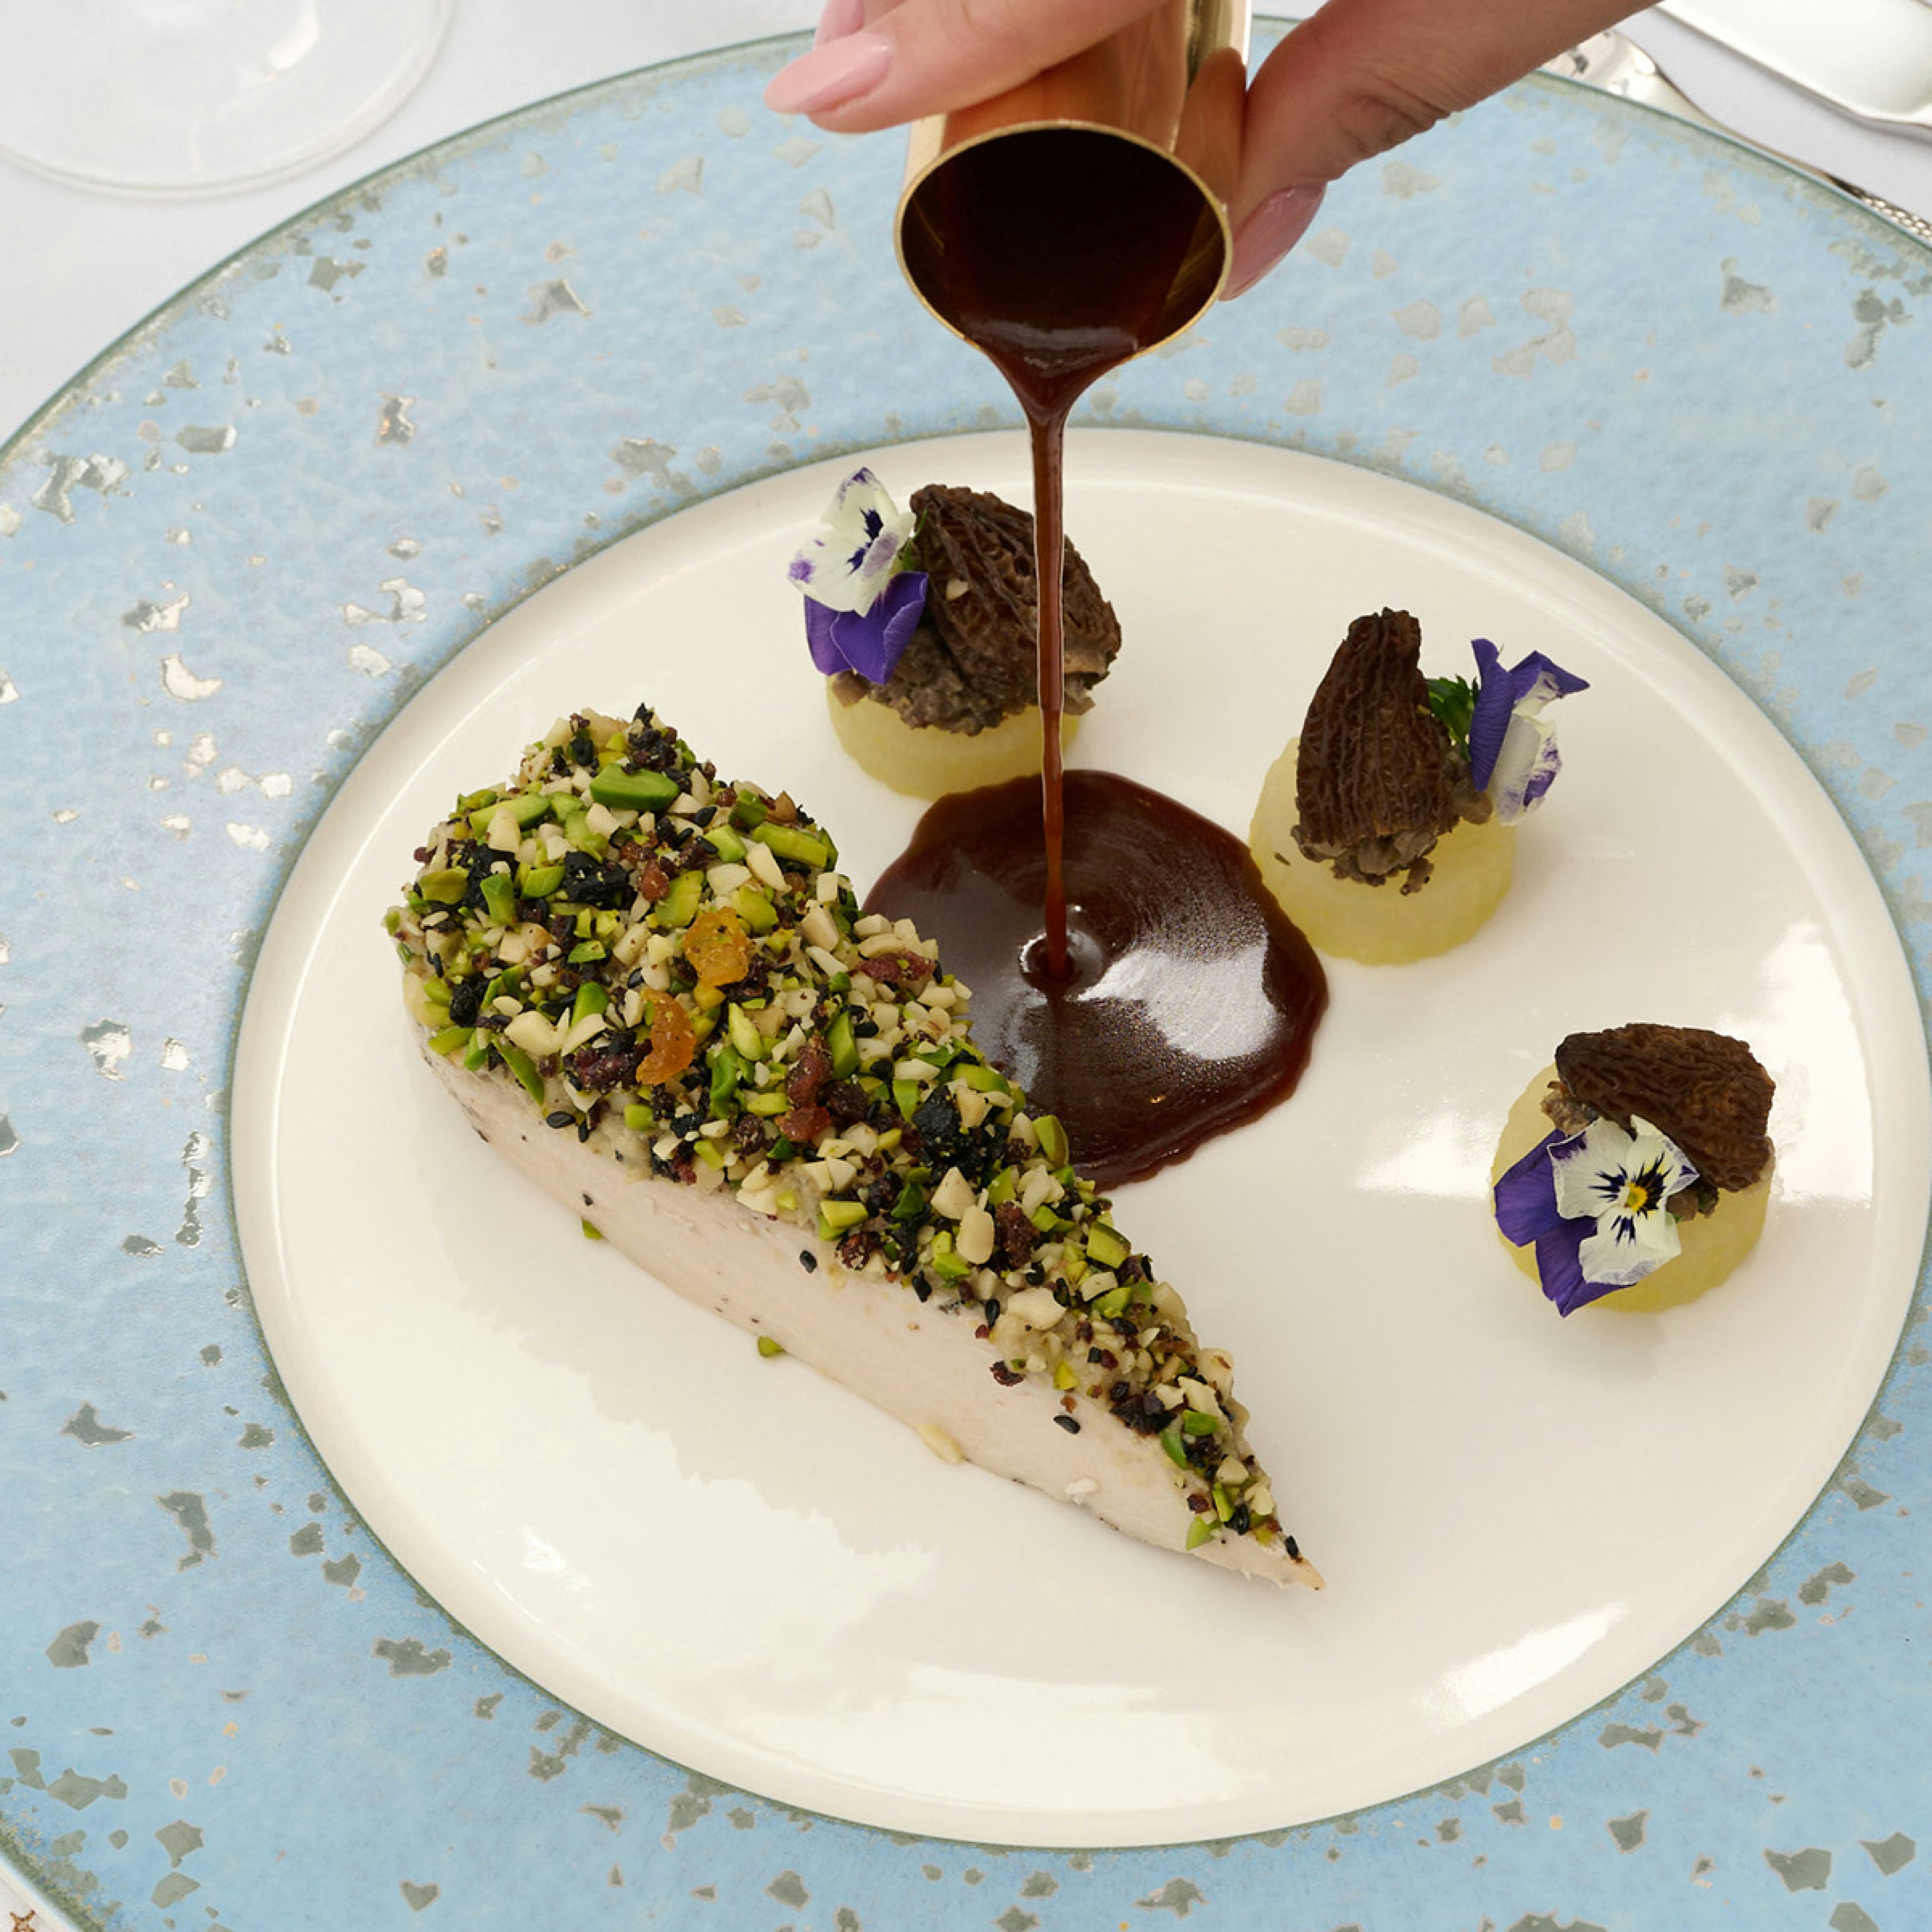 the brand represents the richly indulgent yet artistic dishes